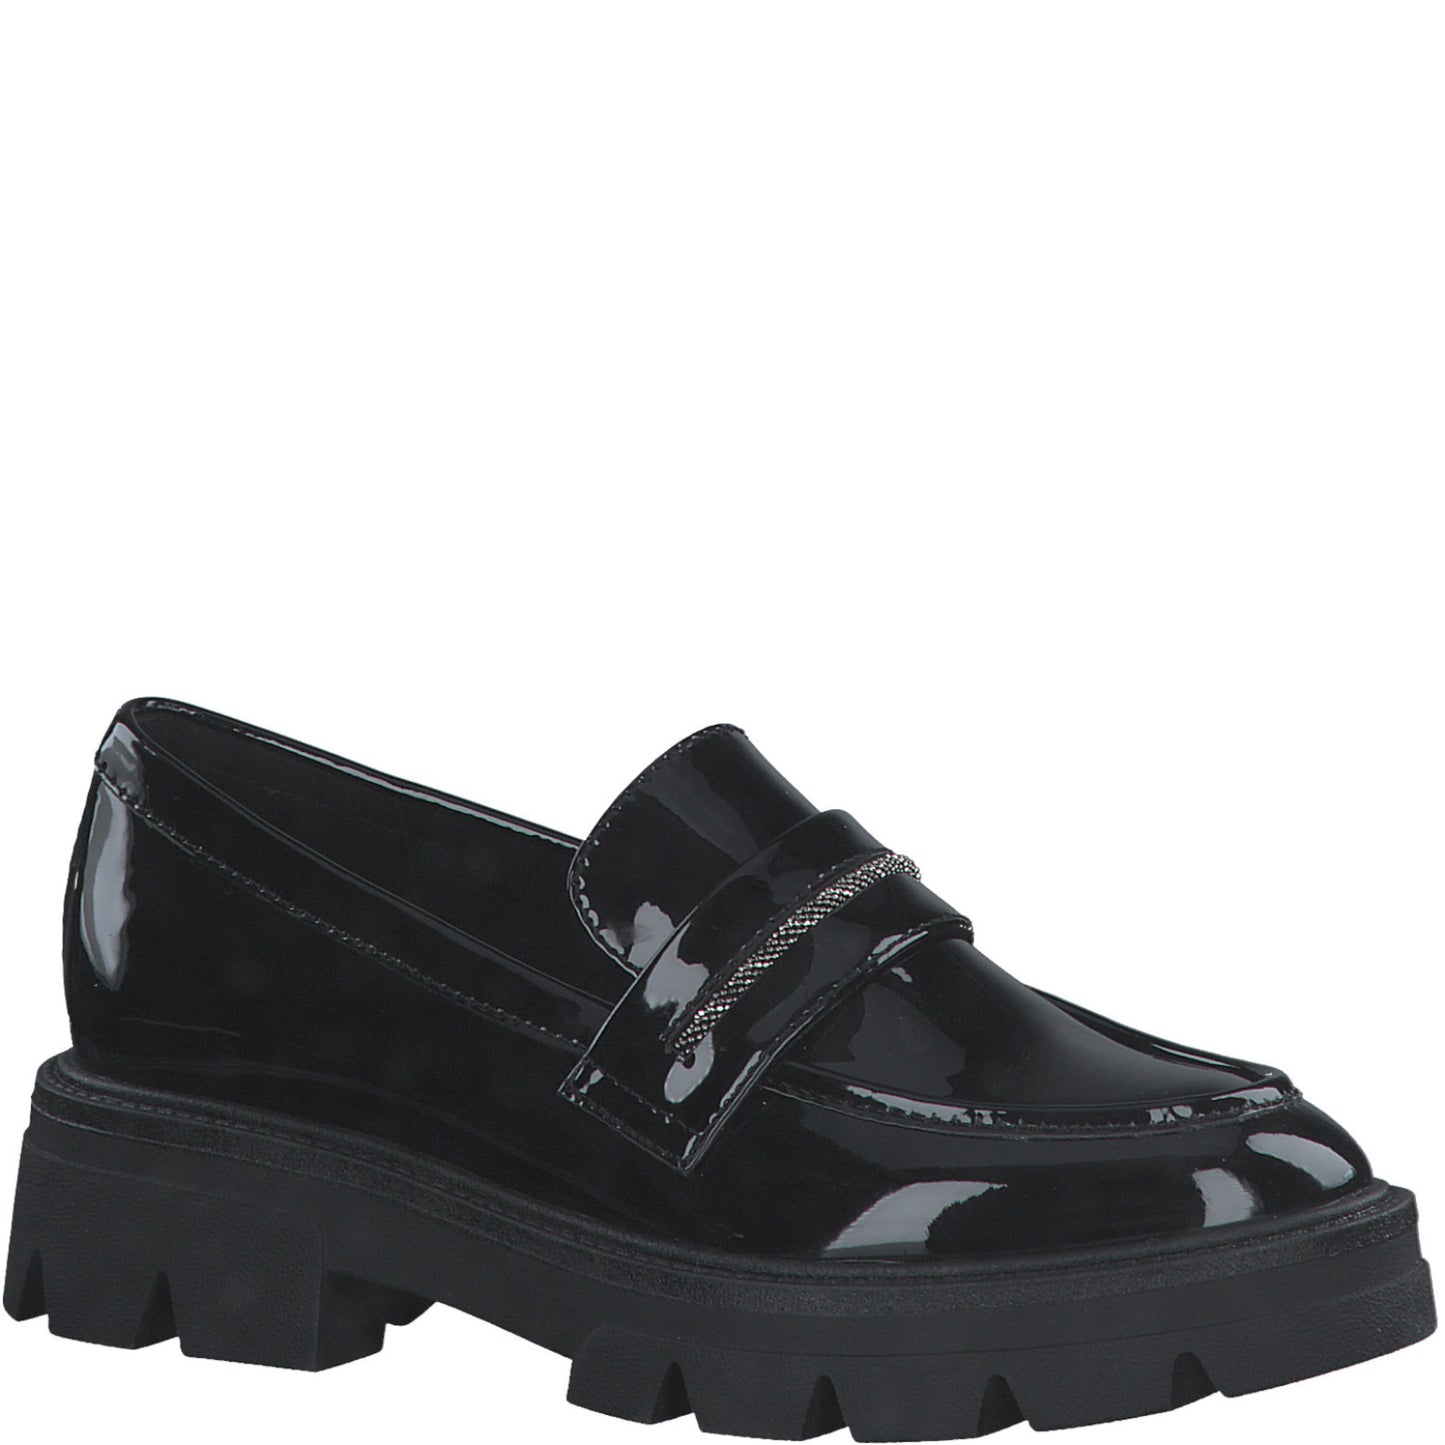 S Oliver 5-24705-41 018 Black Patent Trainers